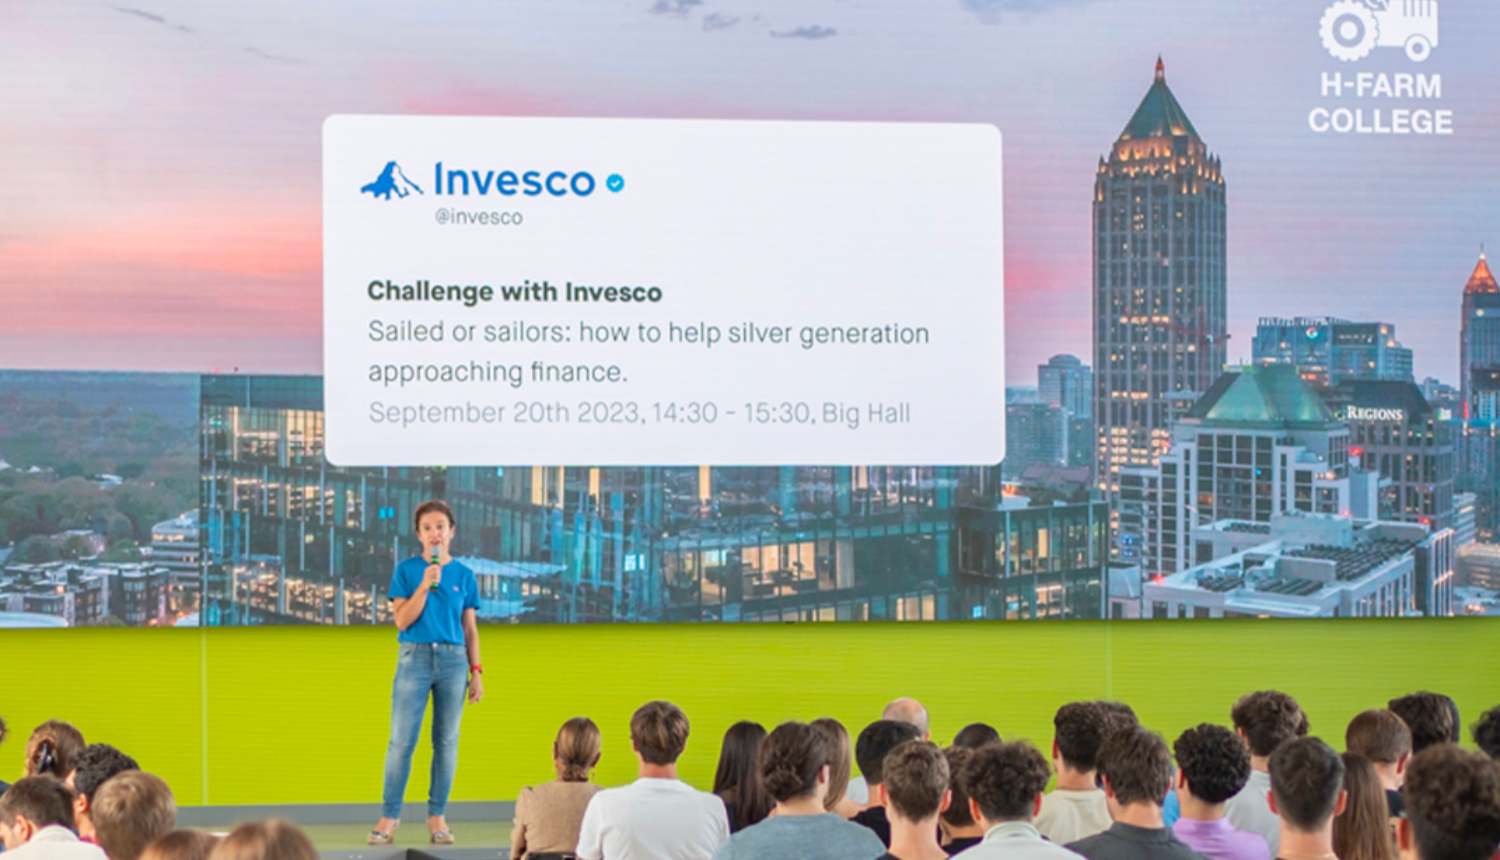 Challenge with Invesco